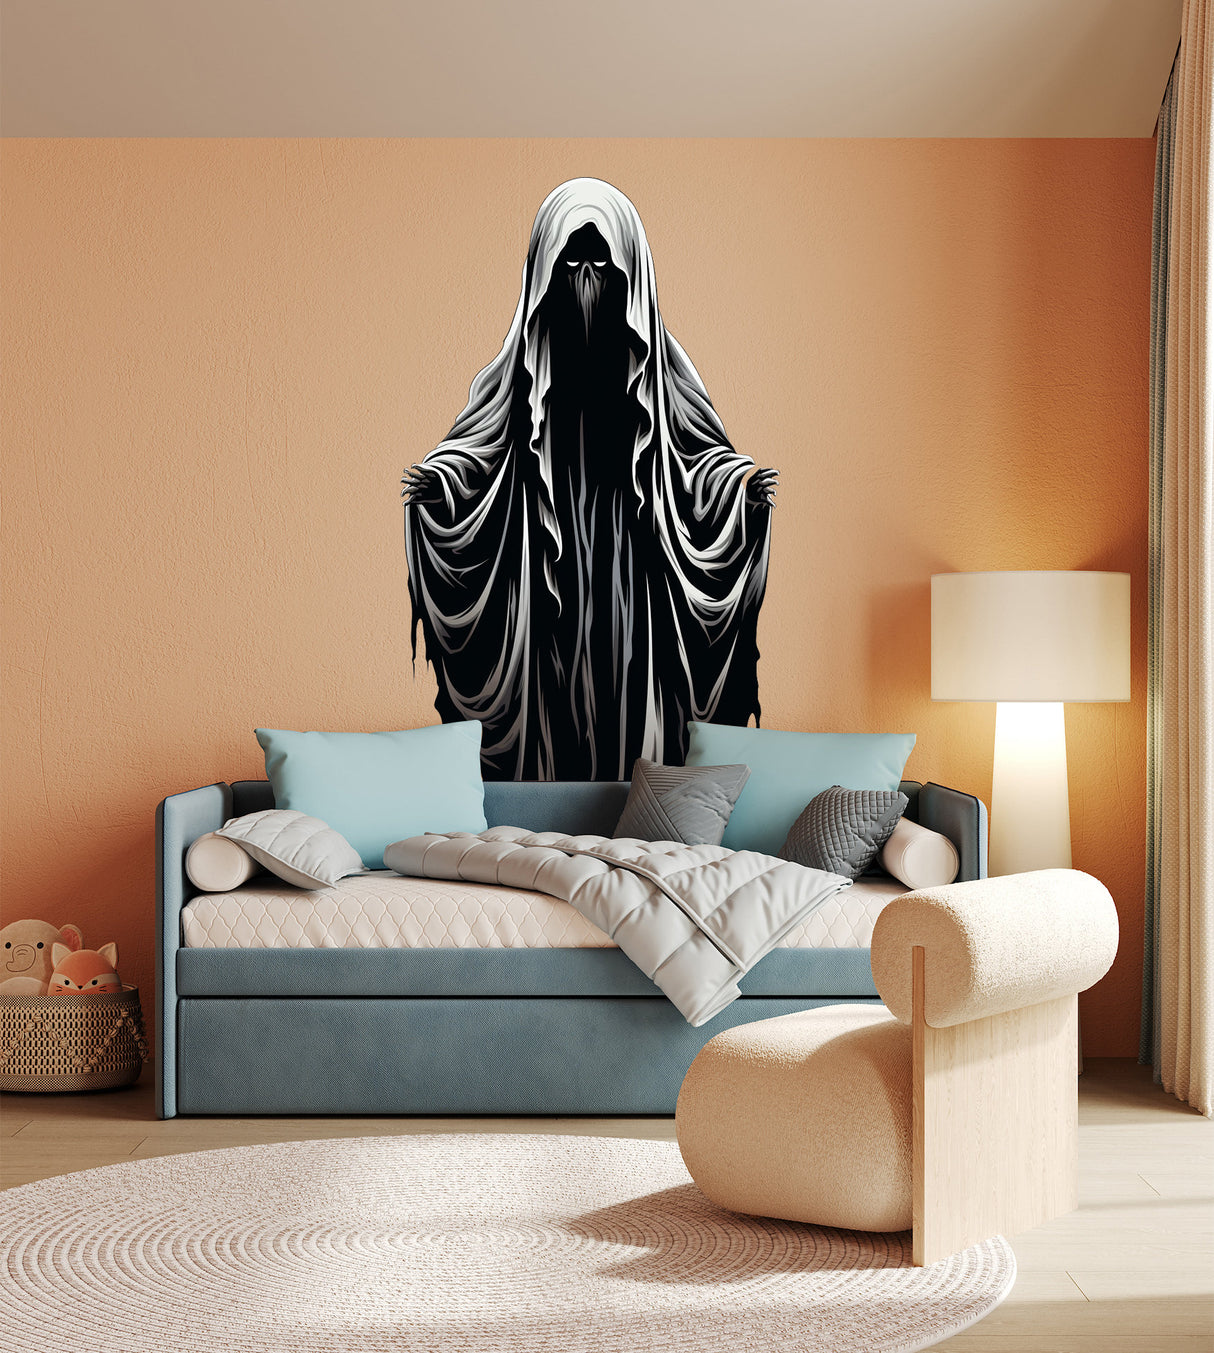 Halloween Haunting Ghoul Wall Art Decal - Shadow Human Monster Sticker